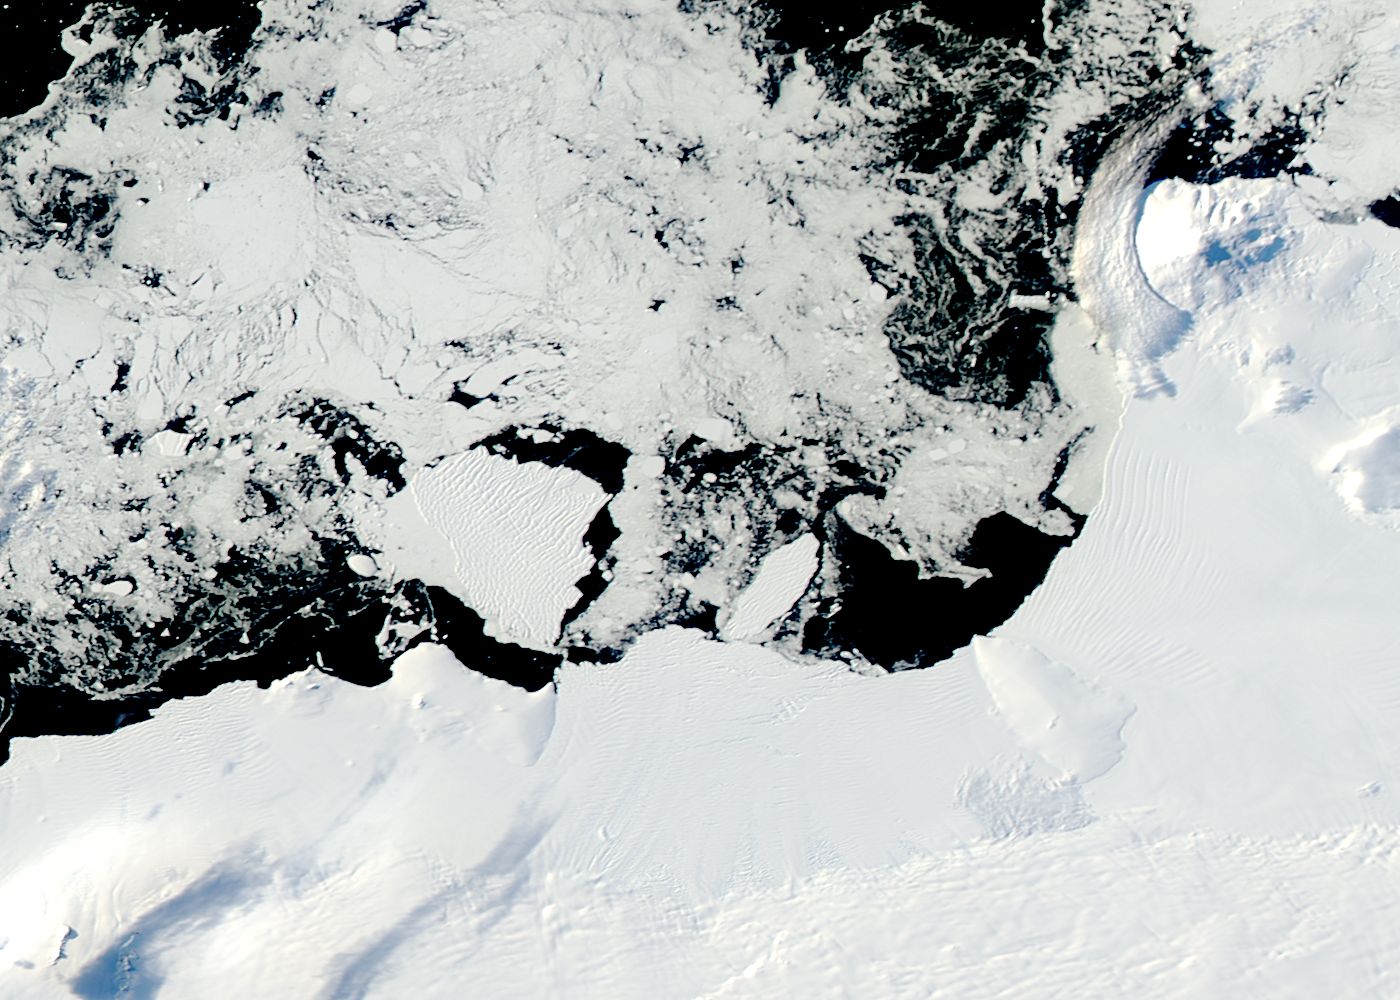 Iceberg B34 in the Amundsen Sea, Antarctica - related image preview